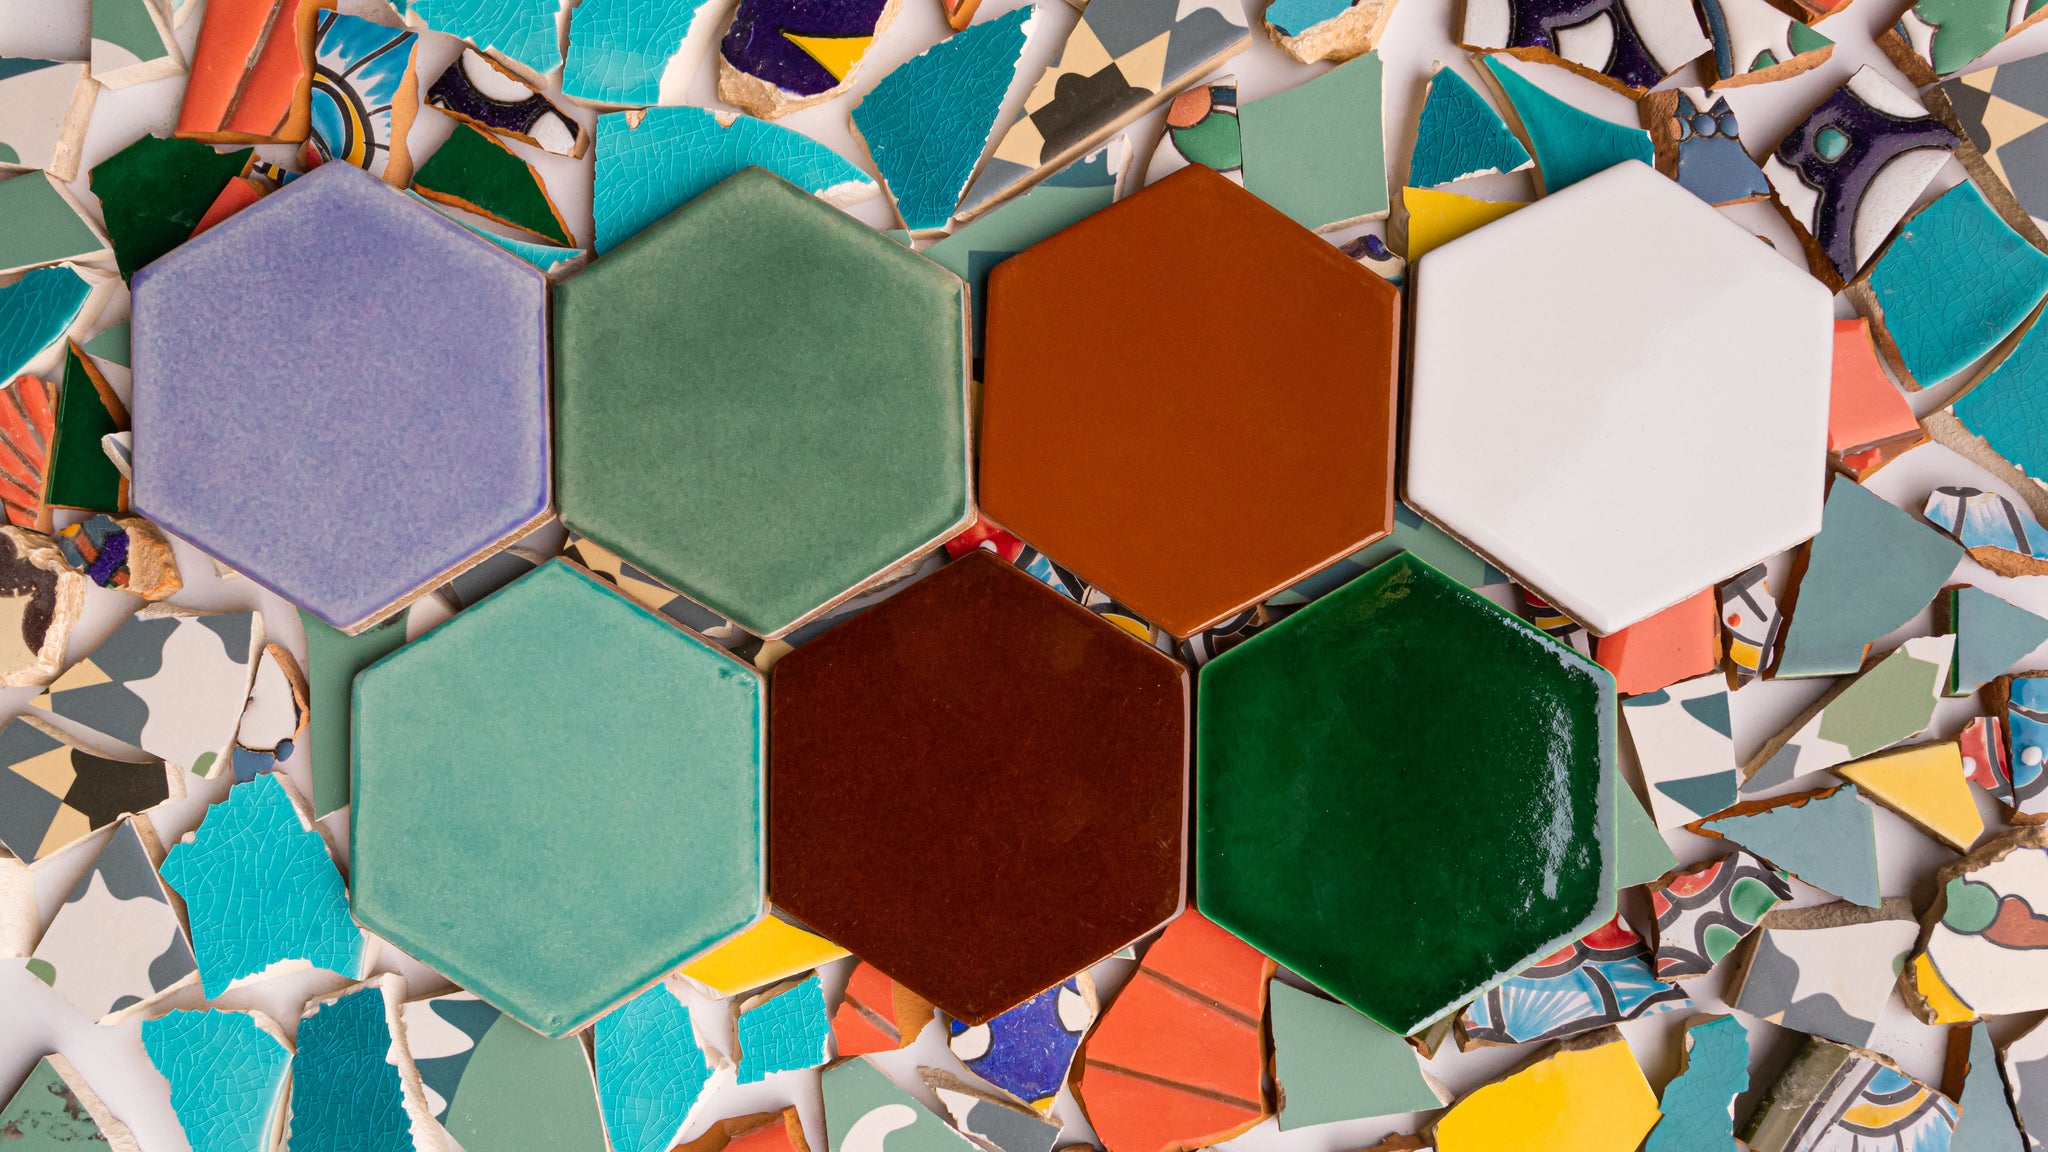 Hexagon shaped colored tile with tile scraps used to make the recycled tile by Clay Imports